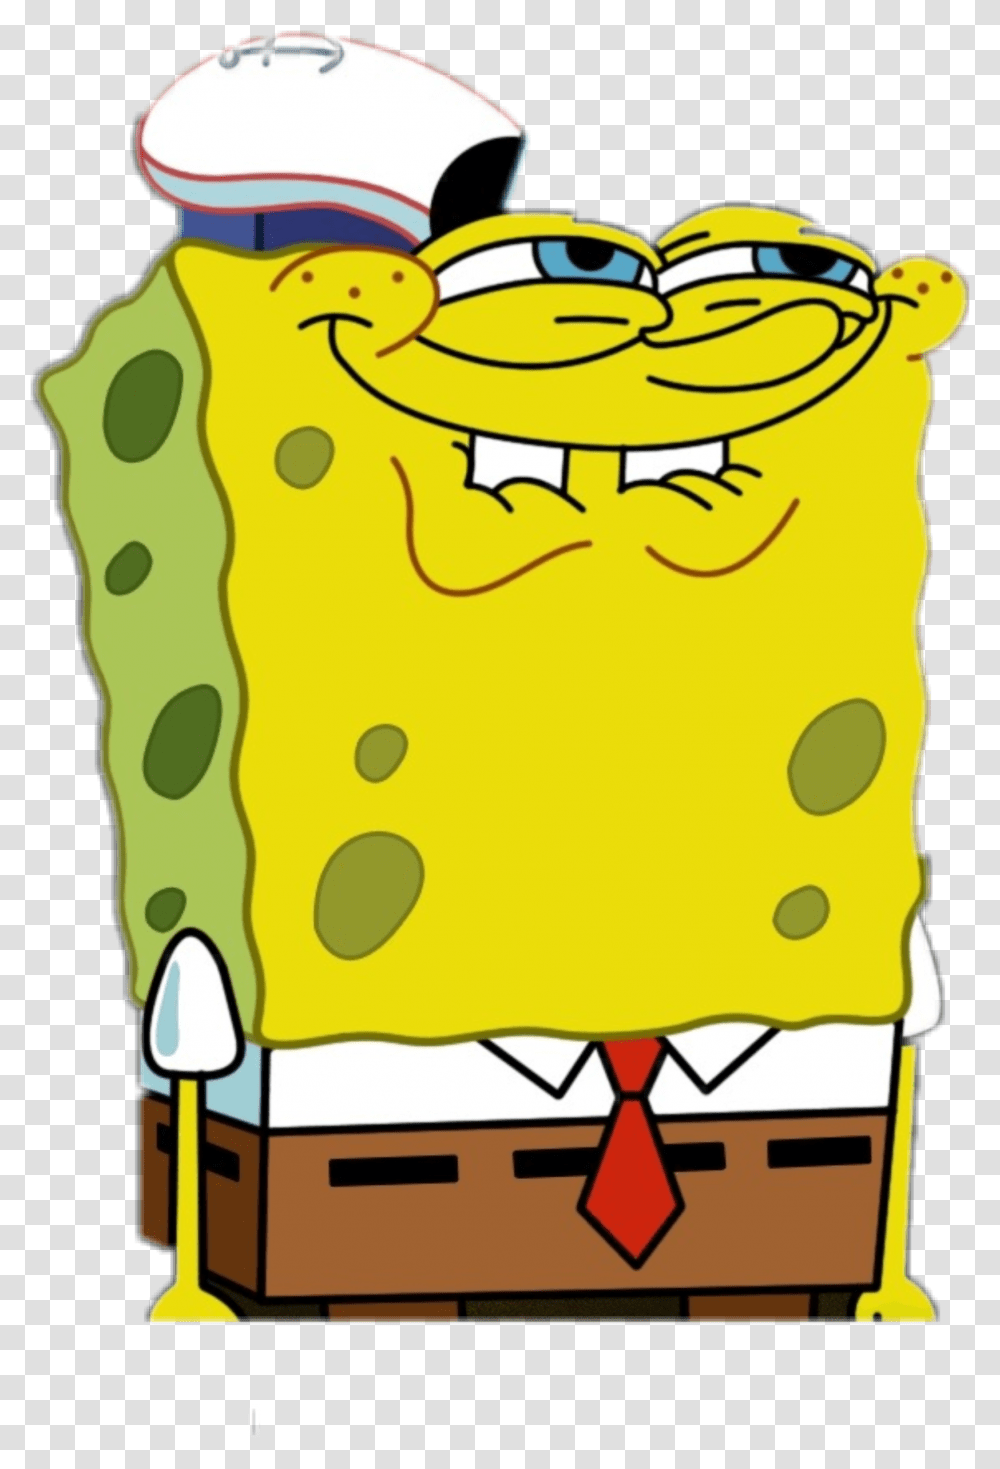 My New Profile Picture Xd Iphone Spongebob, Pillow, Cushion, Food, Plant Transparent Png